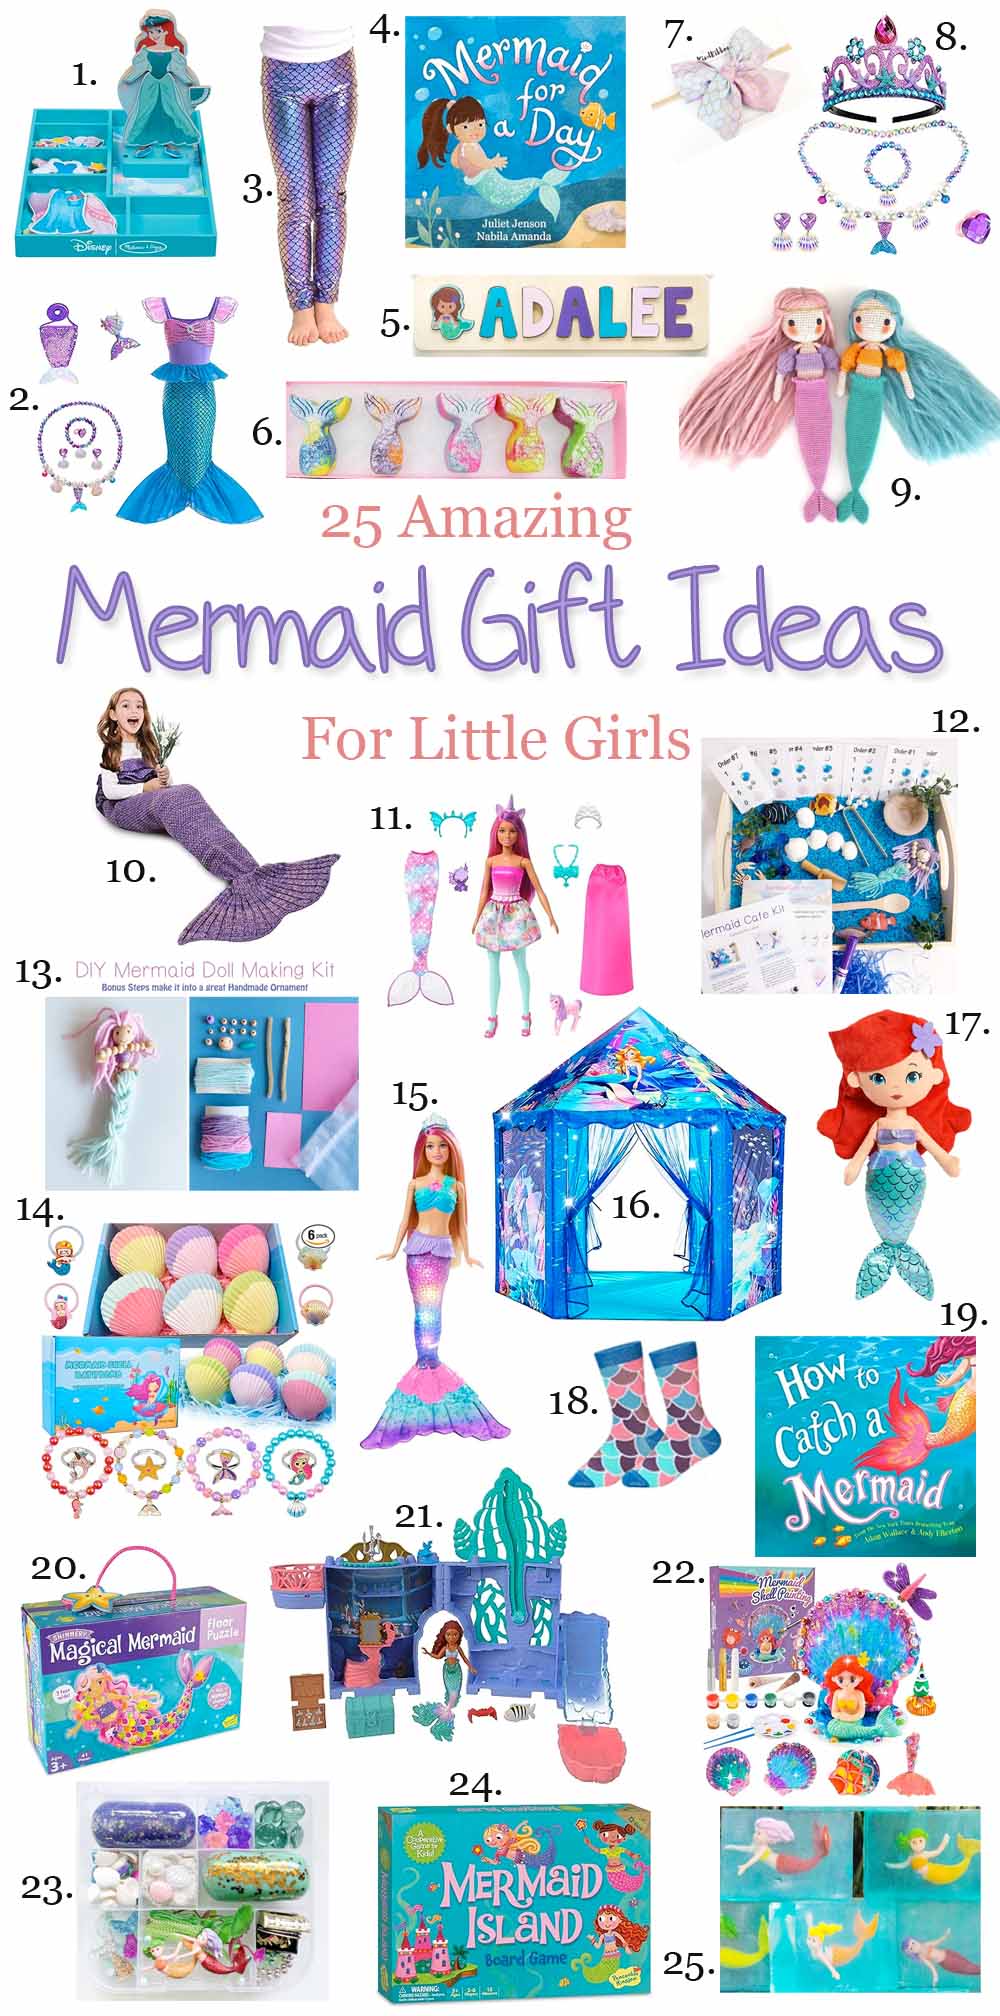 25 of the Best Mermaid Gifts For Little Girls - Mermaid Gift Ideas For 4 year Olds